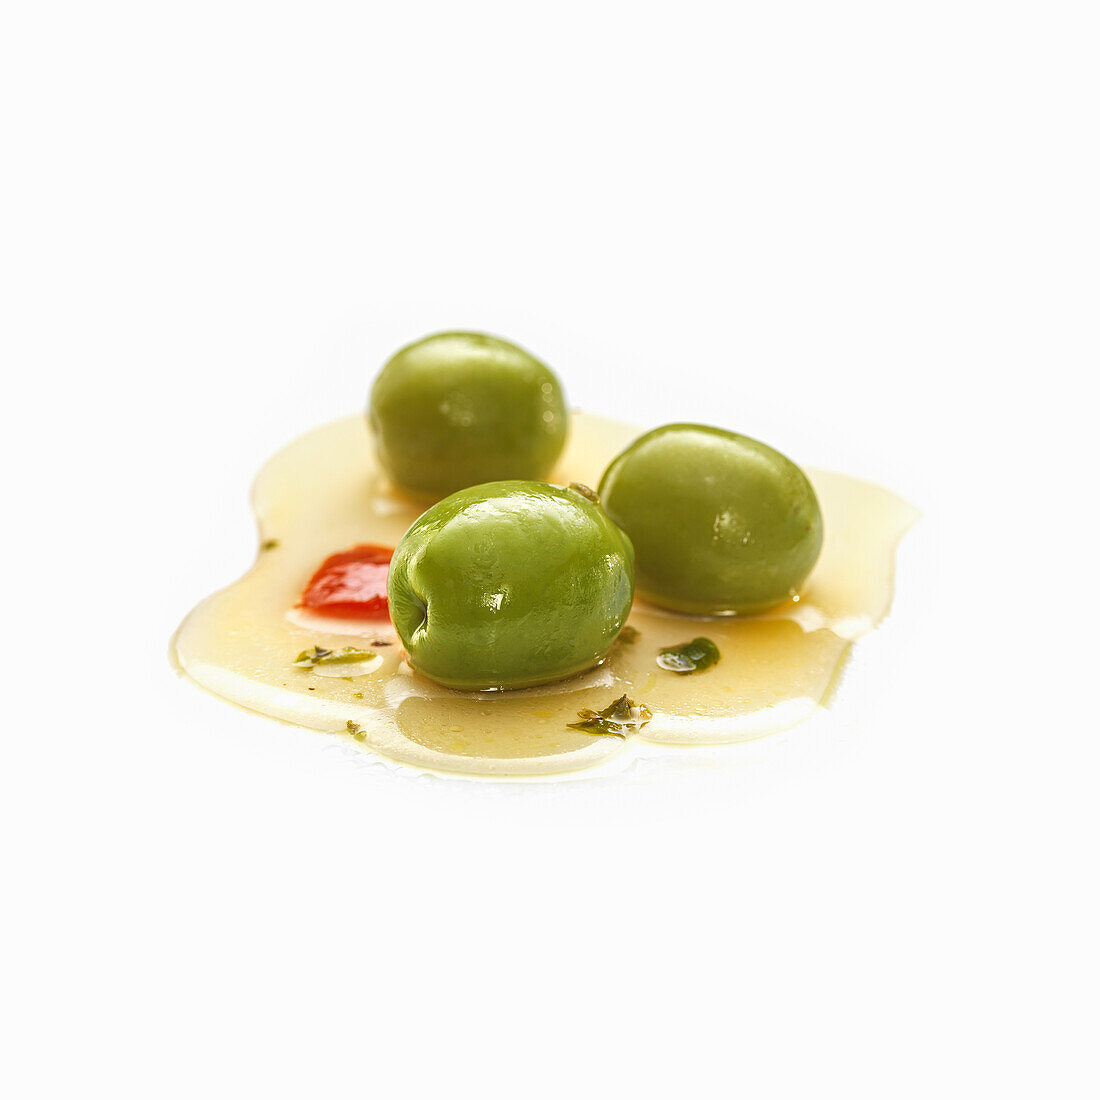 Cured green olives with oregano